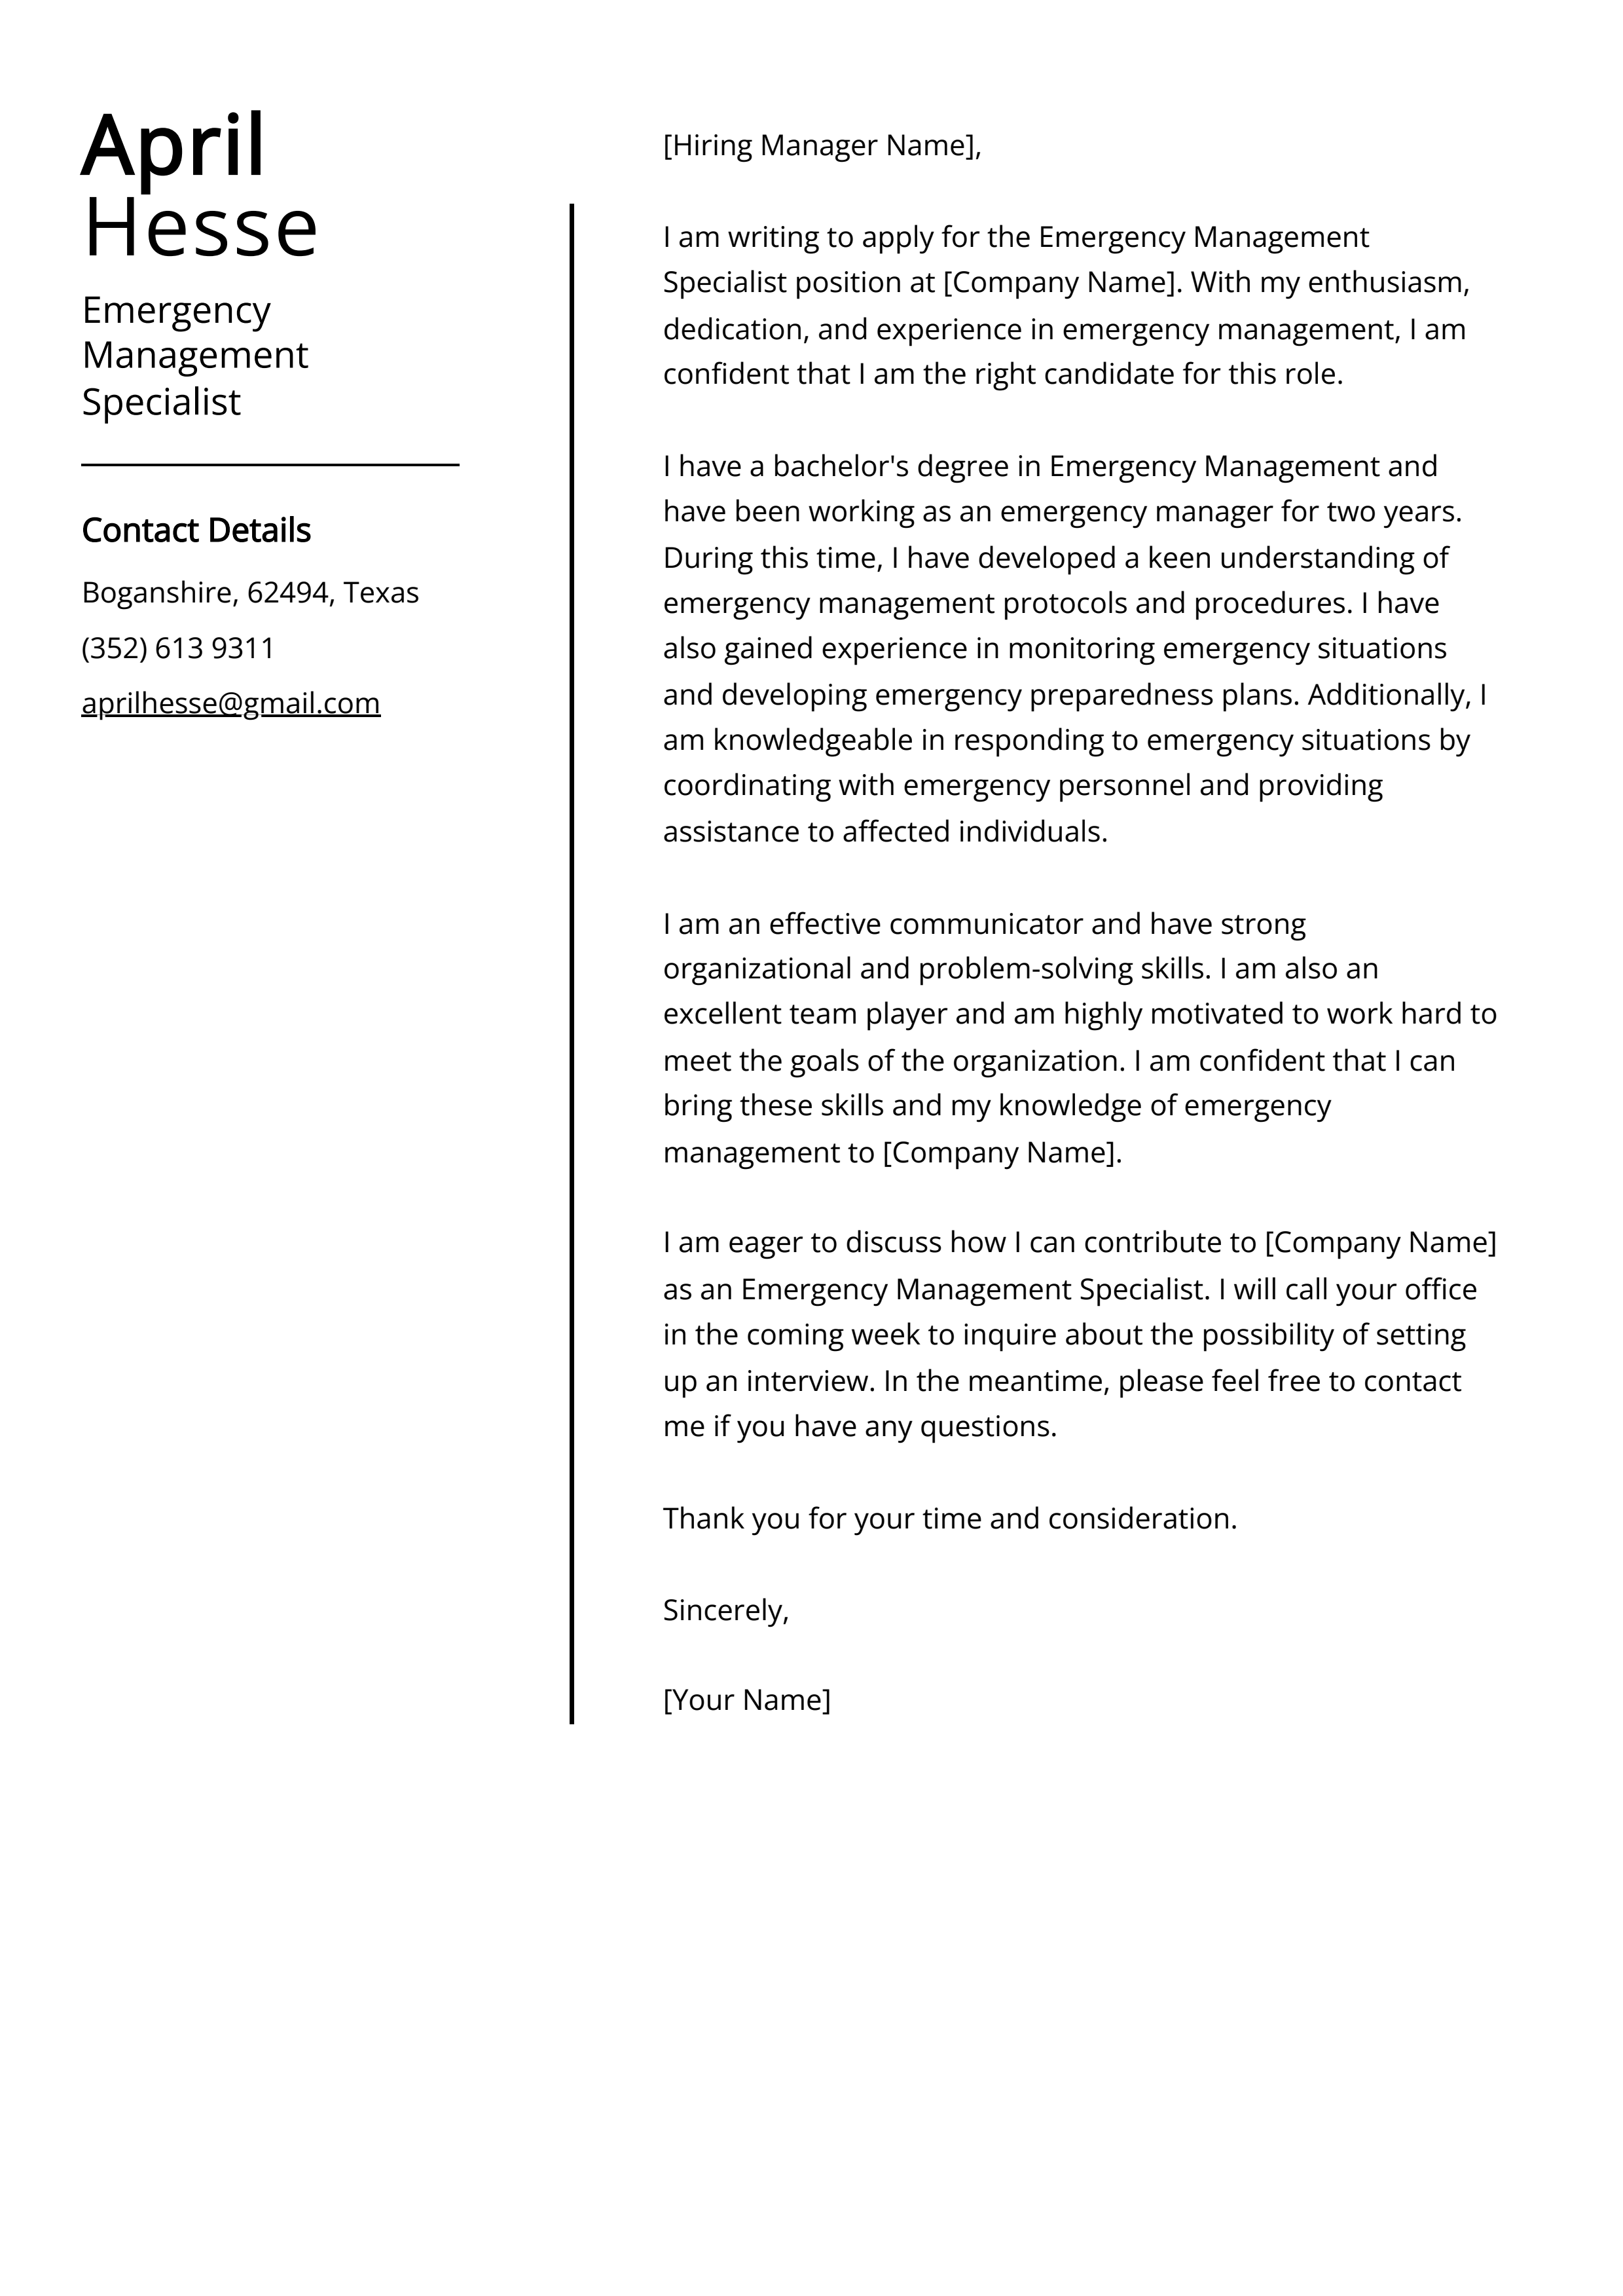 Emergency Management Specialist Cover Letter Example